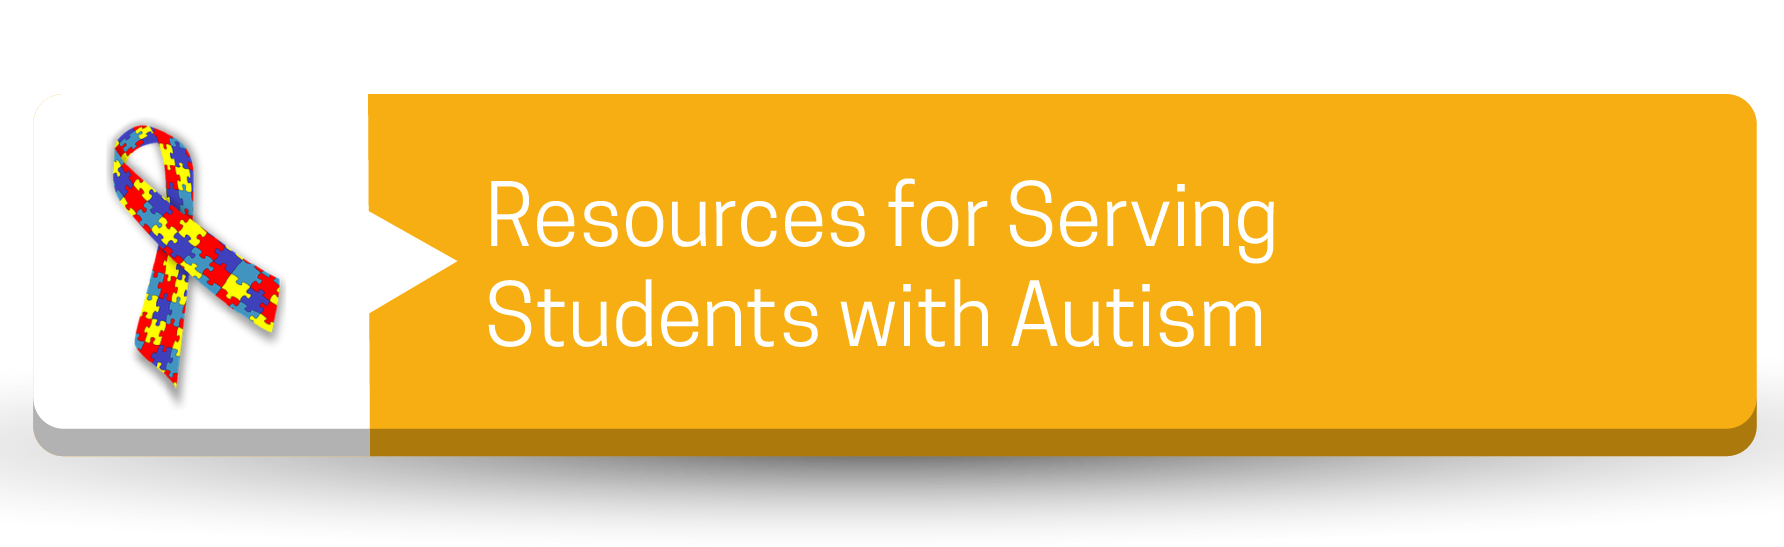 Resources for Serving Students with Autism Button